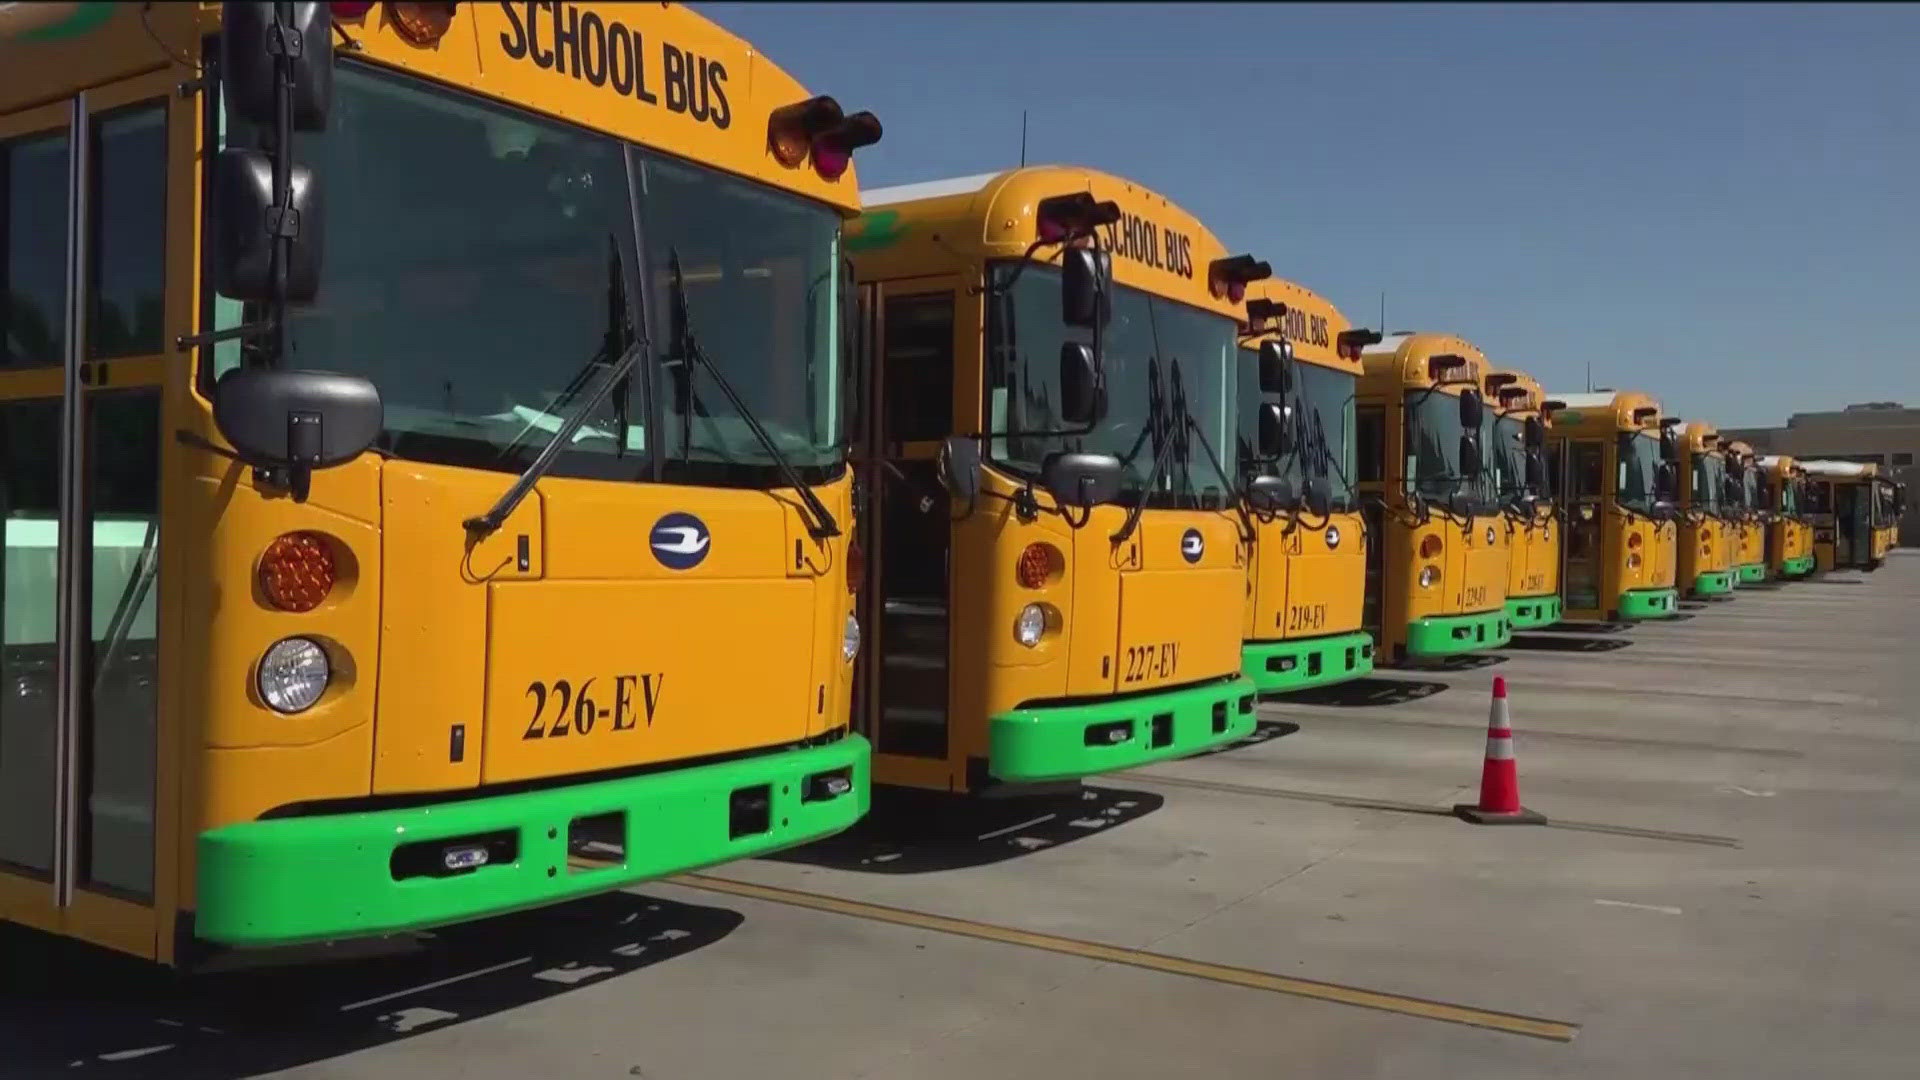 The EPA announced last month that three Arkansas school districts received grants to purchase 35 electric school buses.